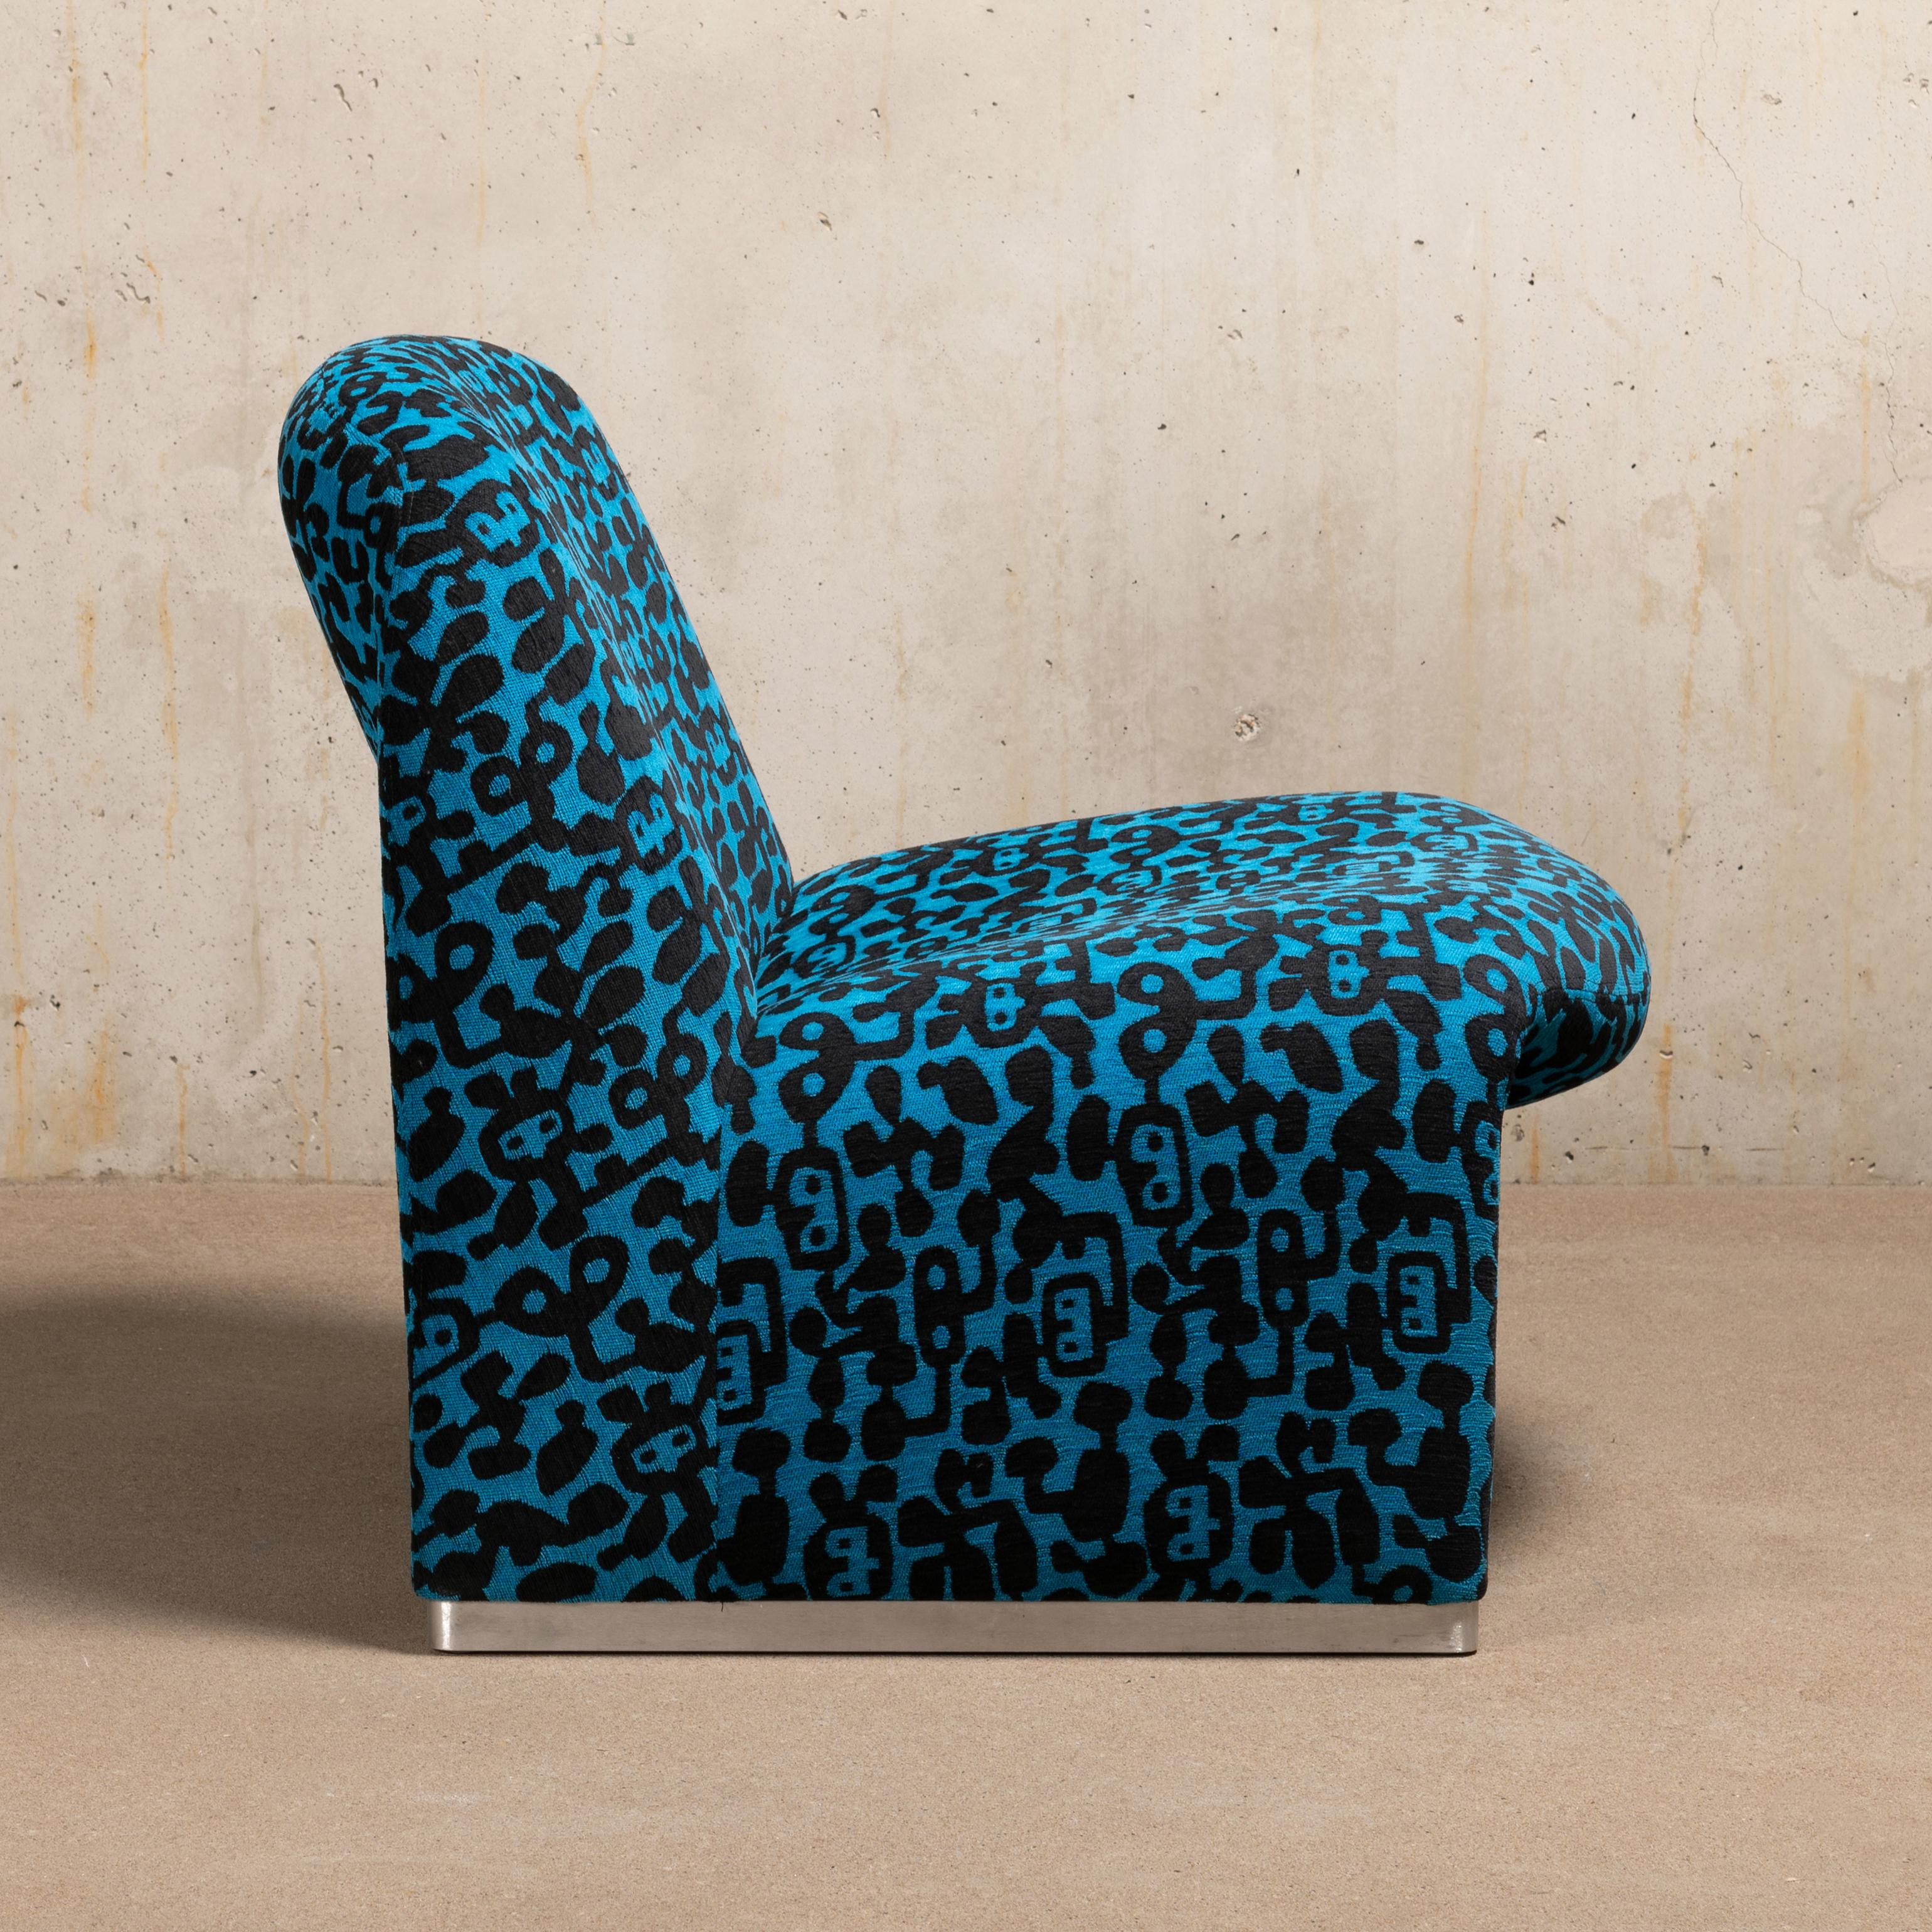 Steel Giancarlo Piretti Alky Lounge Chair in Blue Fabric with Black Pattern, Artifort